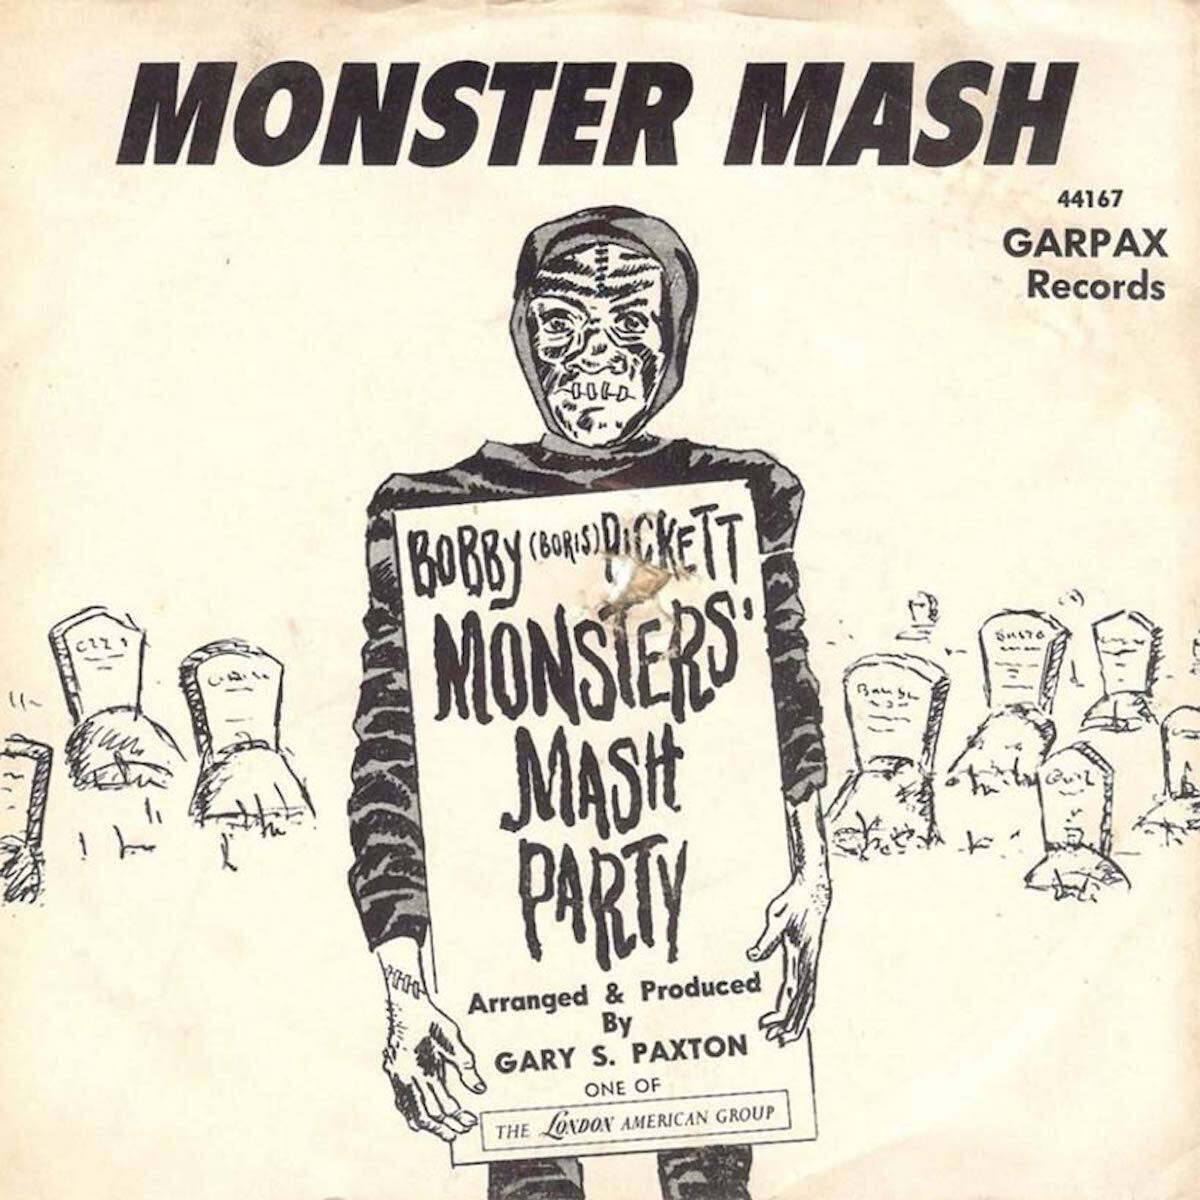 monster mash record, a 1960s one-hit wonder